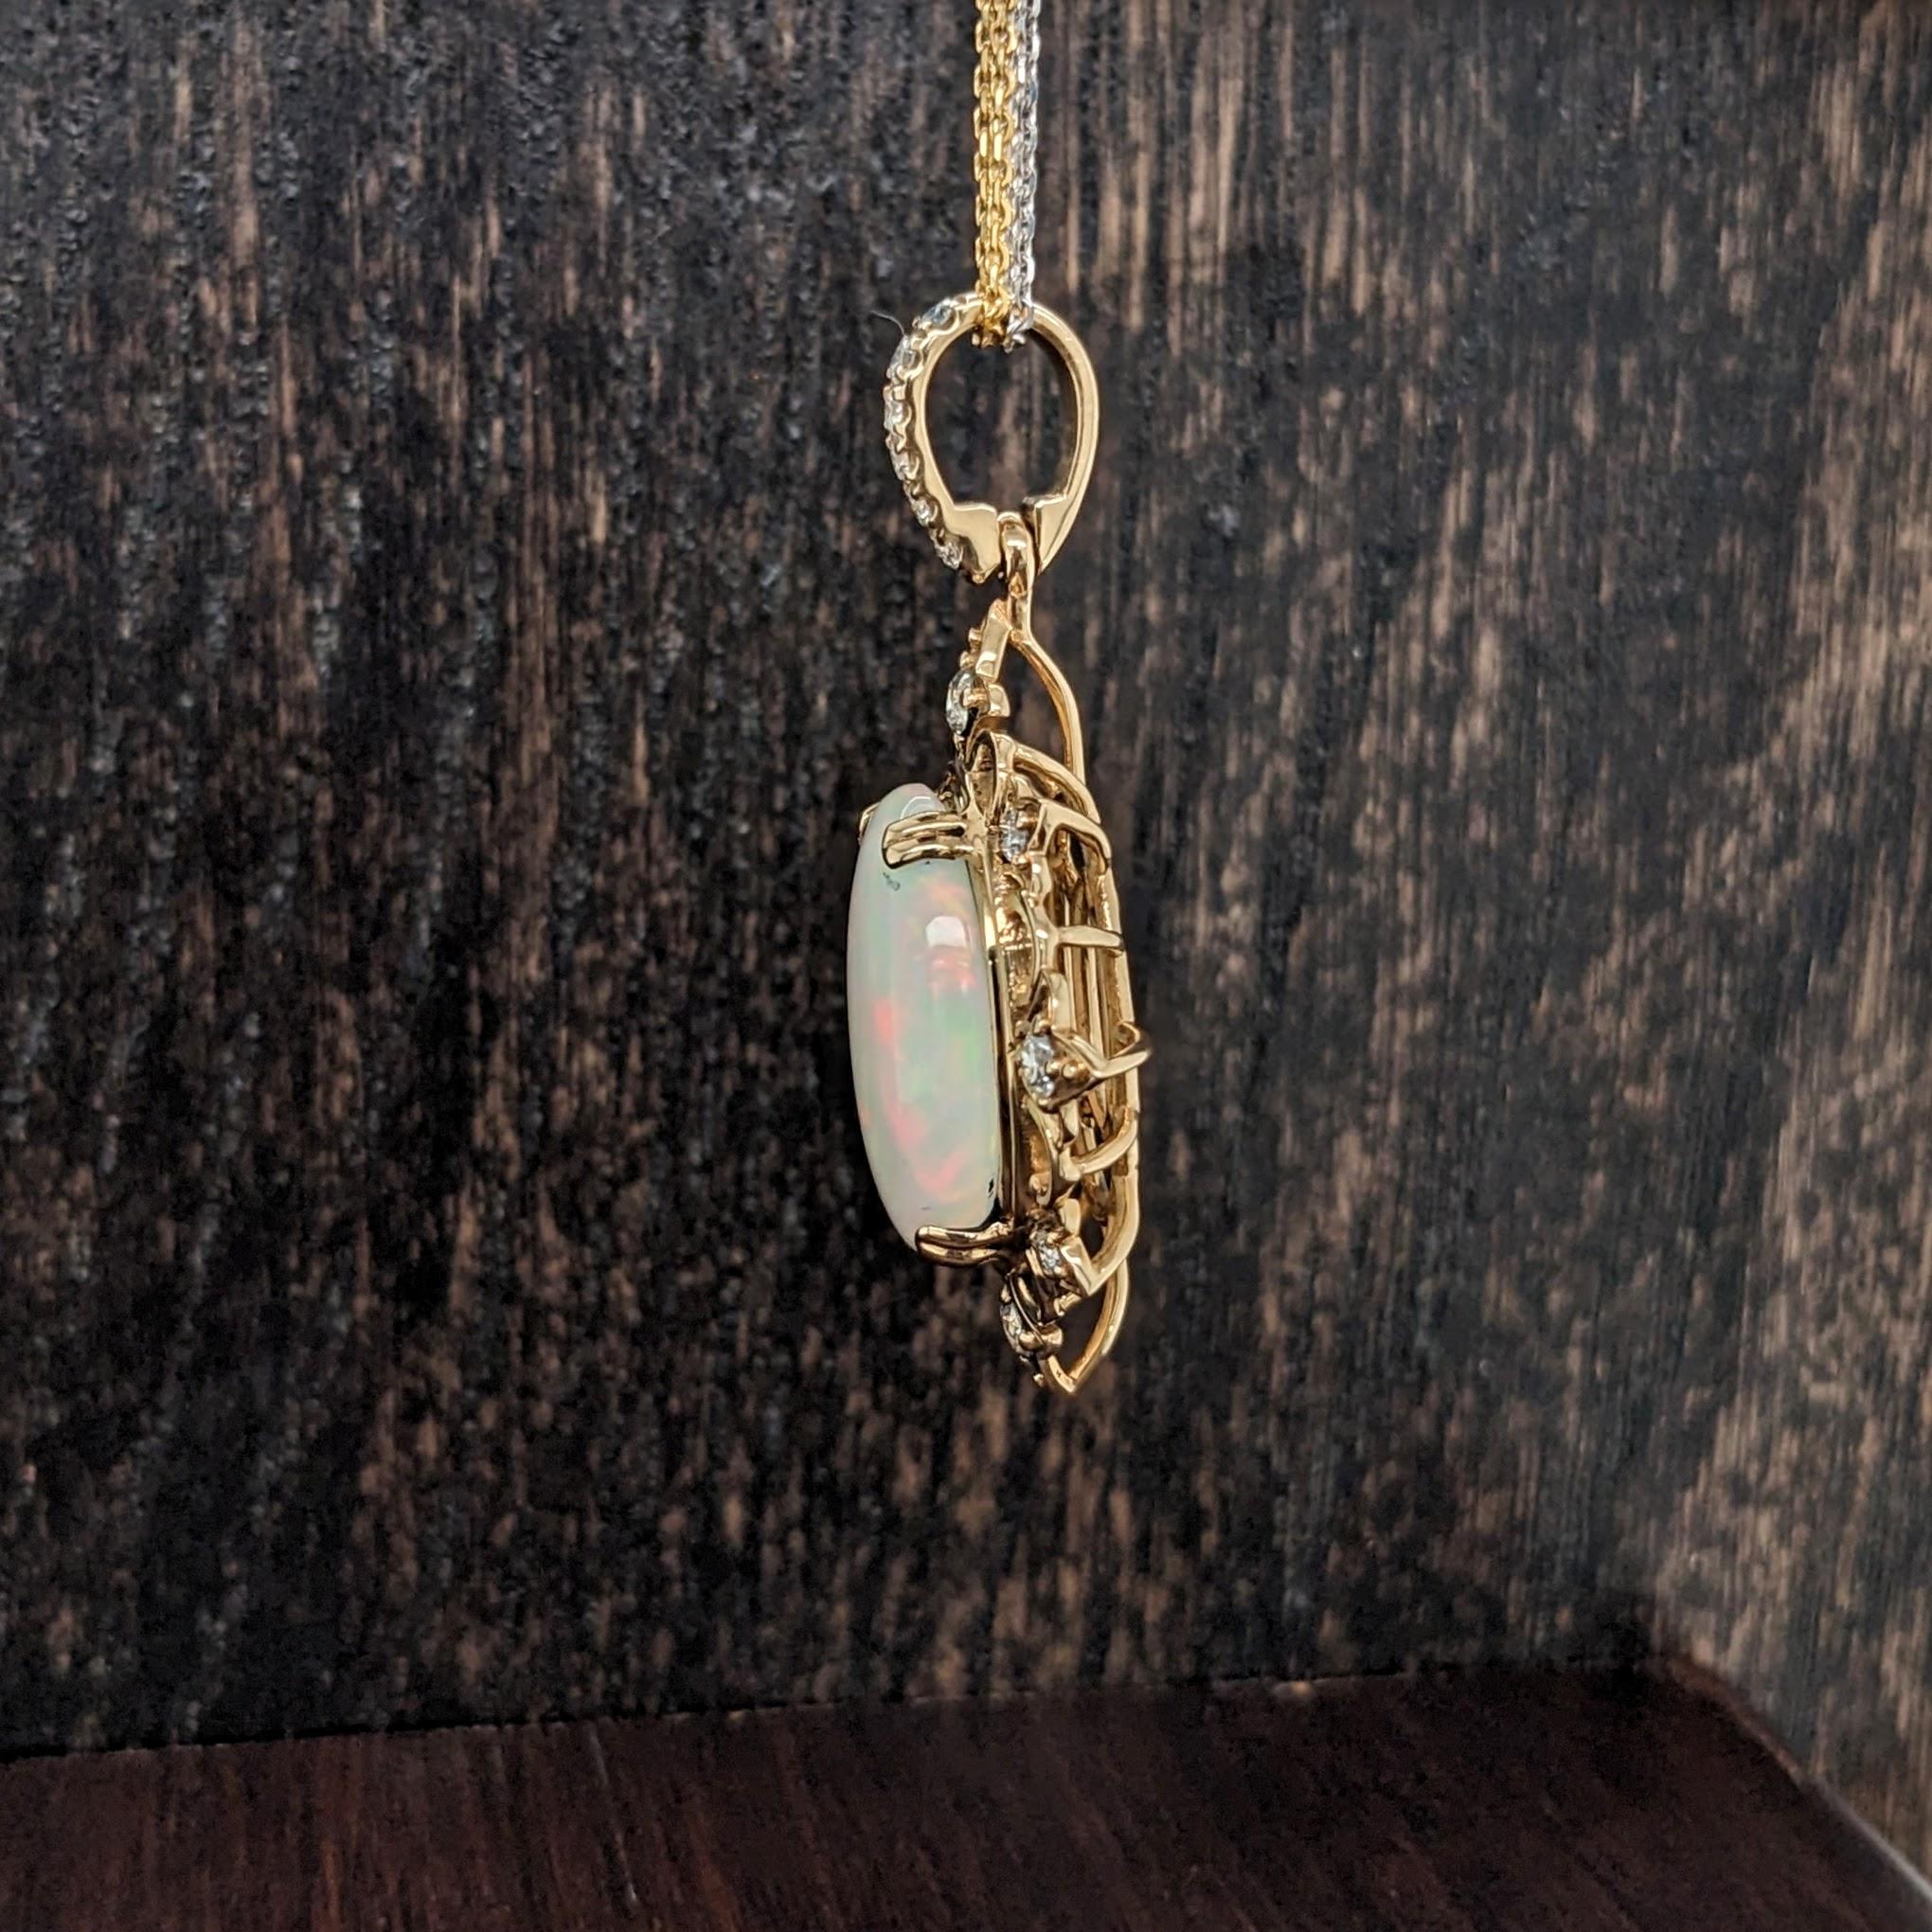 Specifications

Item Type: Pendant
Center Stone: Opal
Treatment: None
Weight: 4.57cts
Head size: 16.7x12.3mm
Shape: Oval
Cut: Cabochon
Hardness: 5.5-6.5
Origin: Ethiopia

Metal: 14k/3.93g
Diamonds S/I GH: 14/0.40cts

Sku: AJP200/2652

This pendant